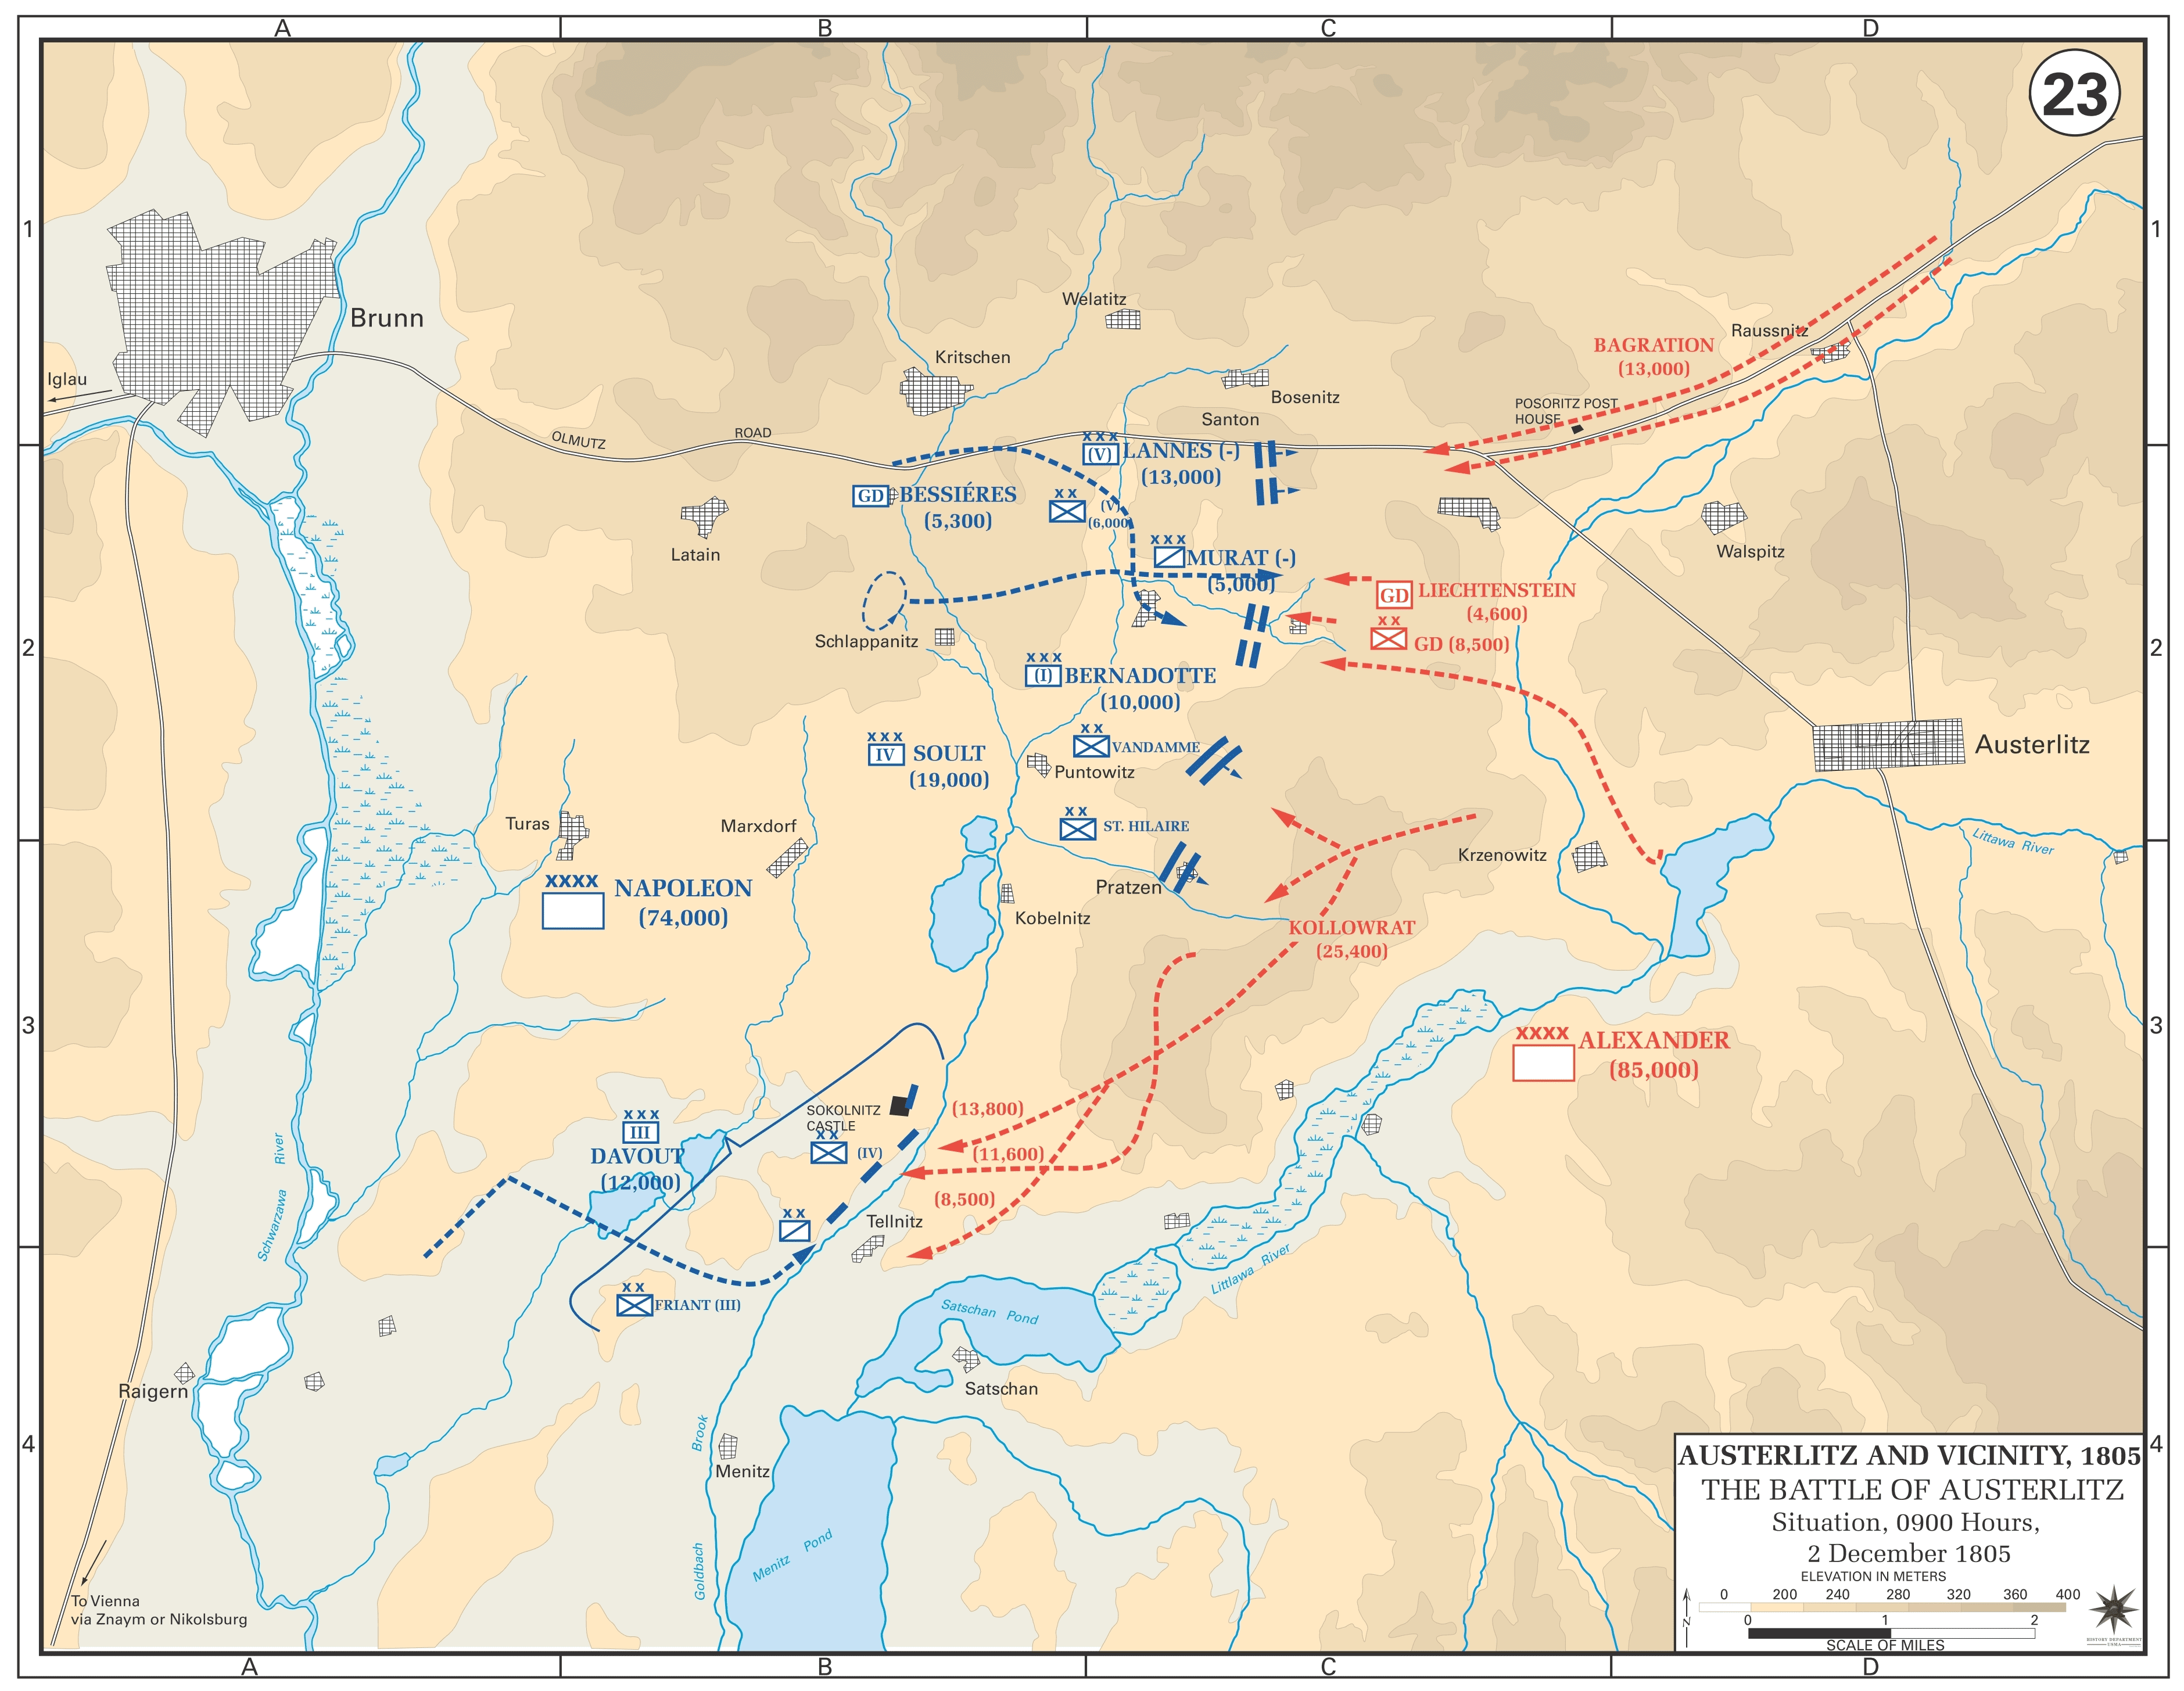 Battle_of_Austerlitz_-_Situation_at_0900%2C_2_December_1805.png